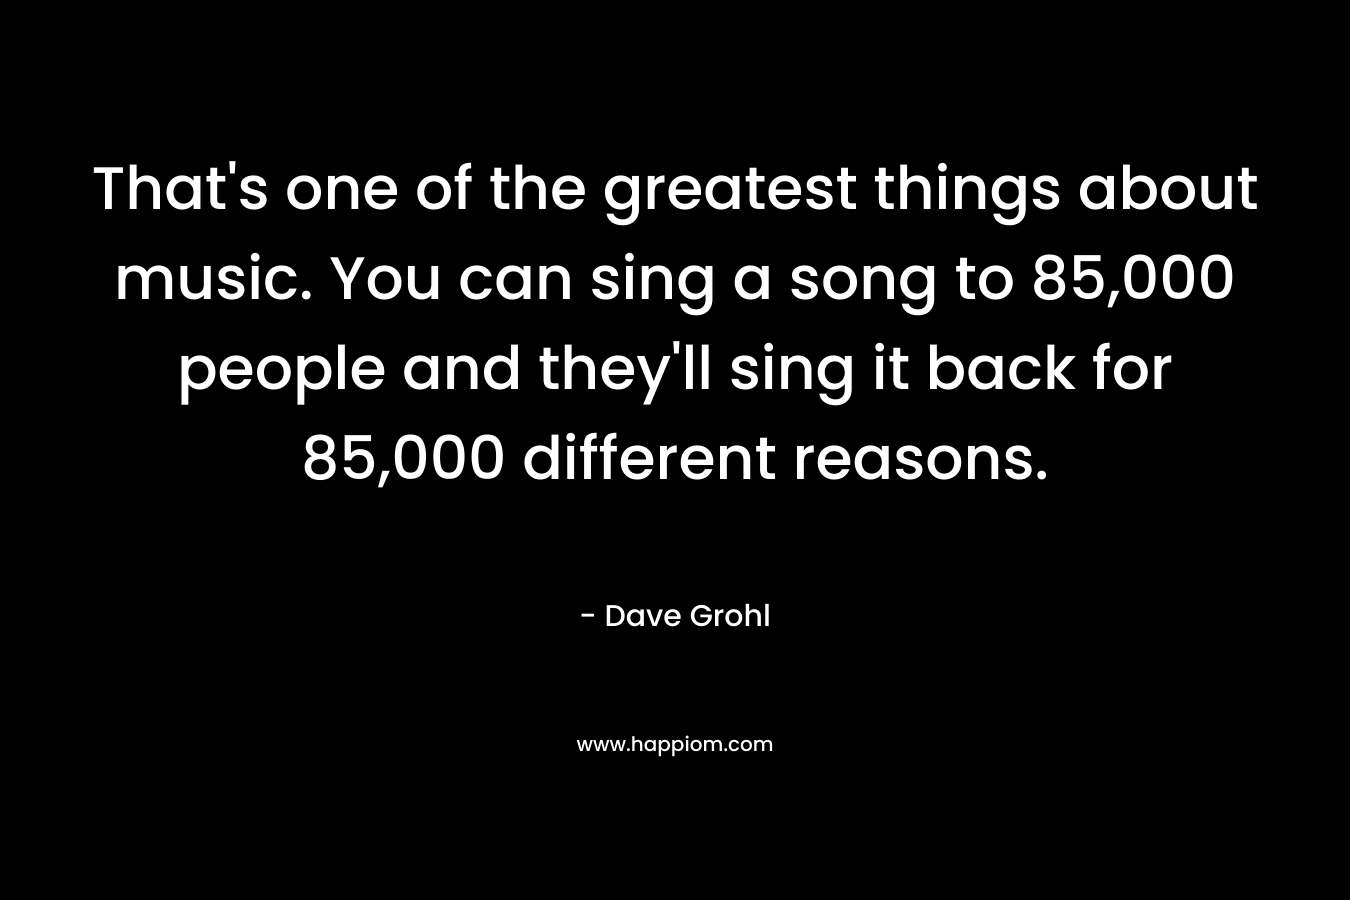 That's one of the greatest things about music. You can sing a song to 85,000 people and they'll sing it back for 85,000 different reasons.